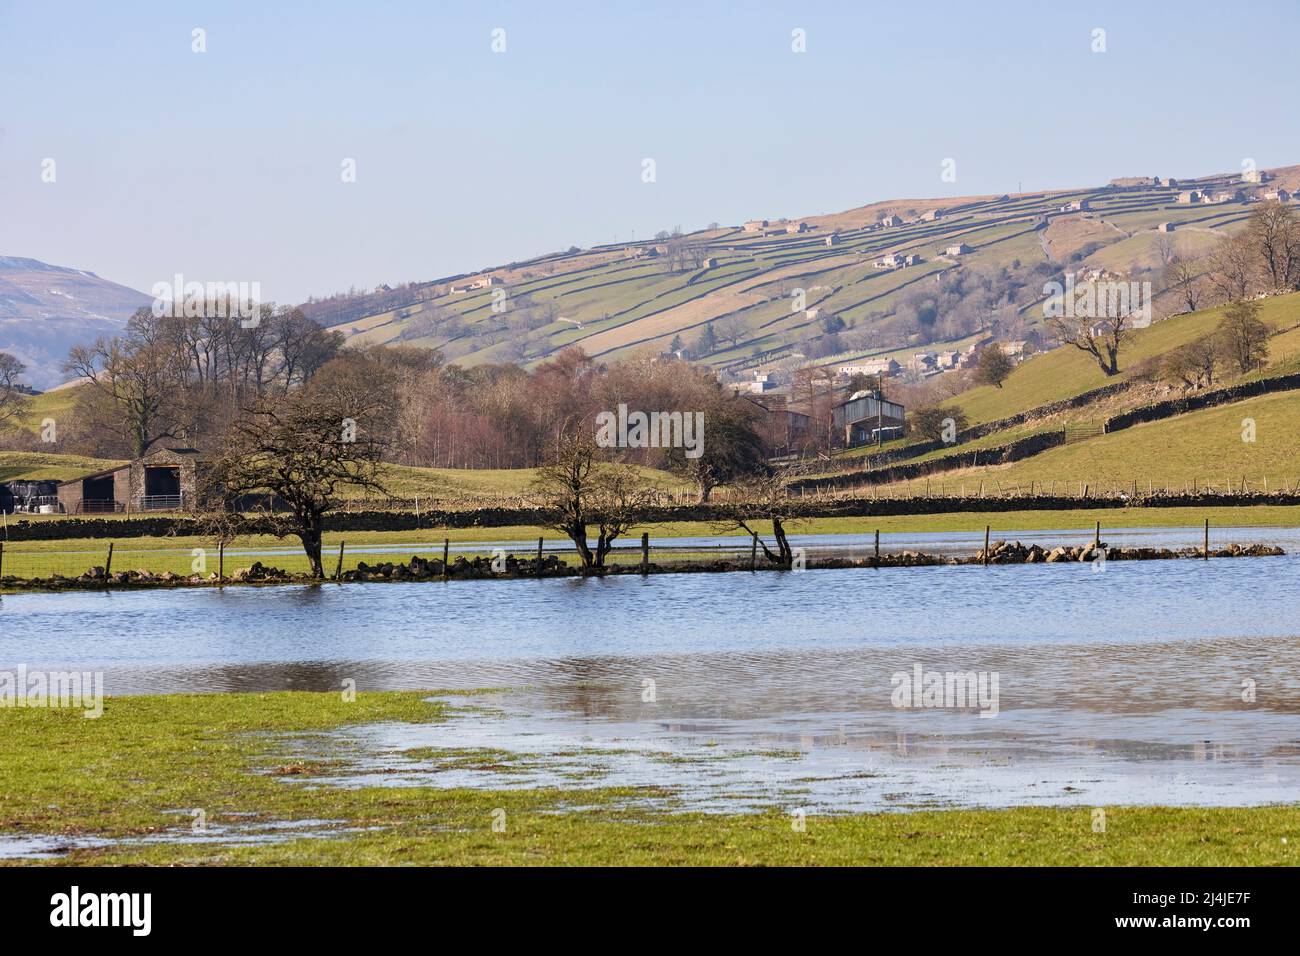 Flooded fields near Reeth in Swaledale, Yorkshire Dales National Park. Iconic stone barns and dry stone walls on the hillside above. Stock Photo